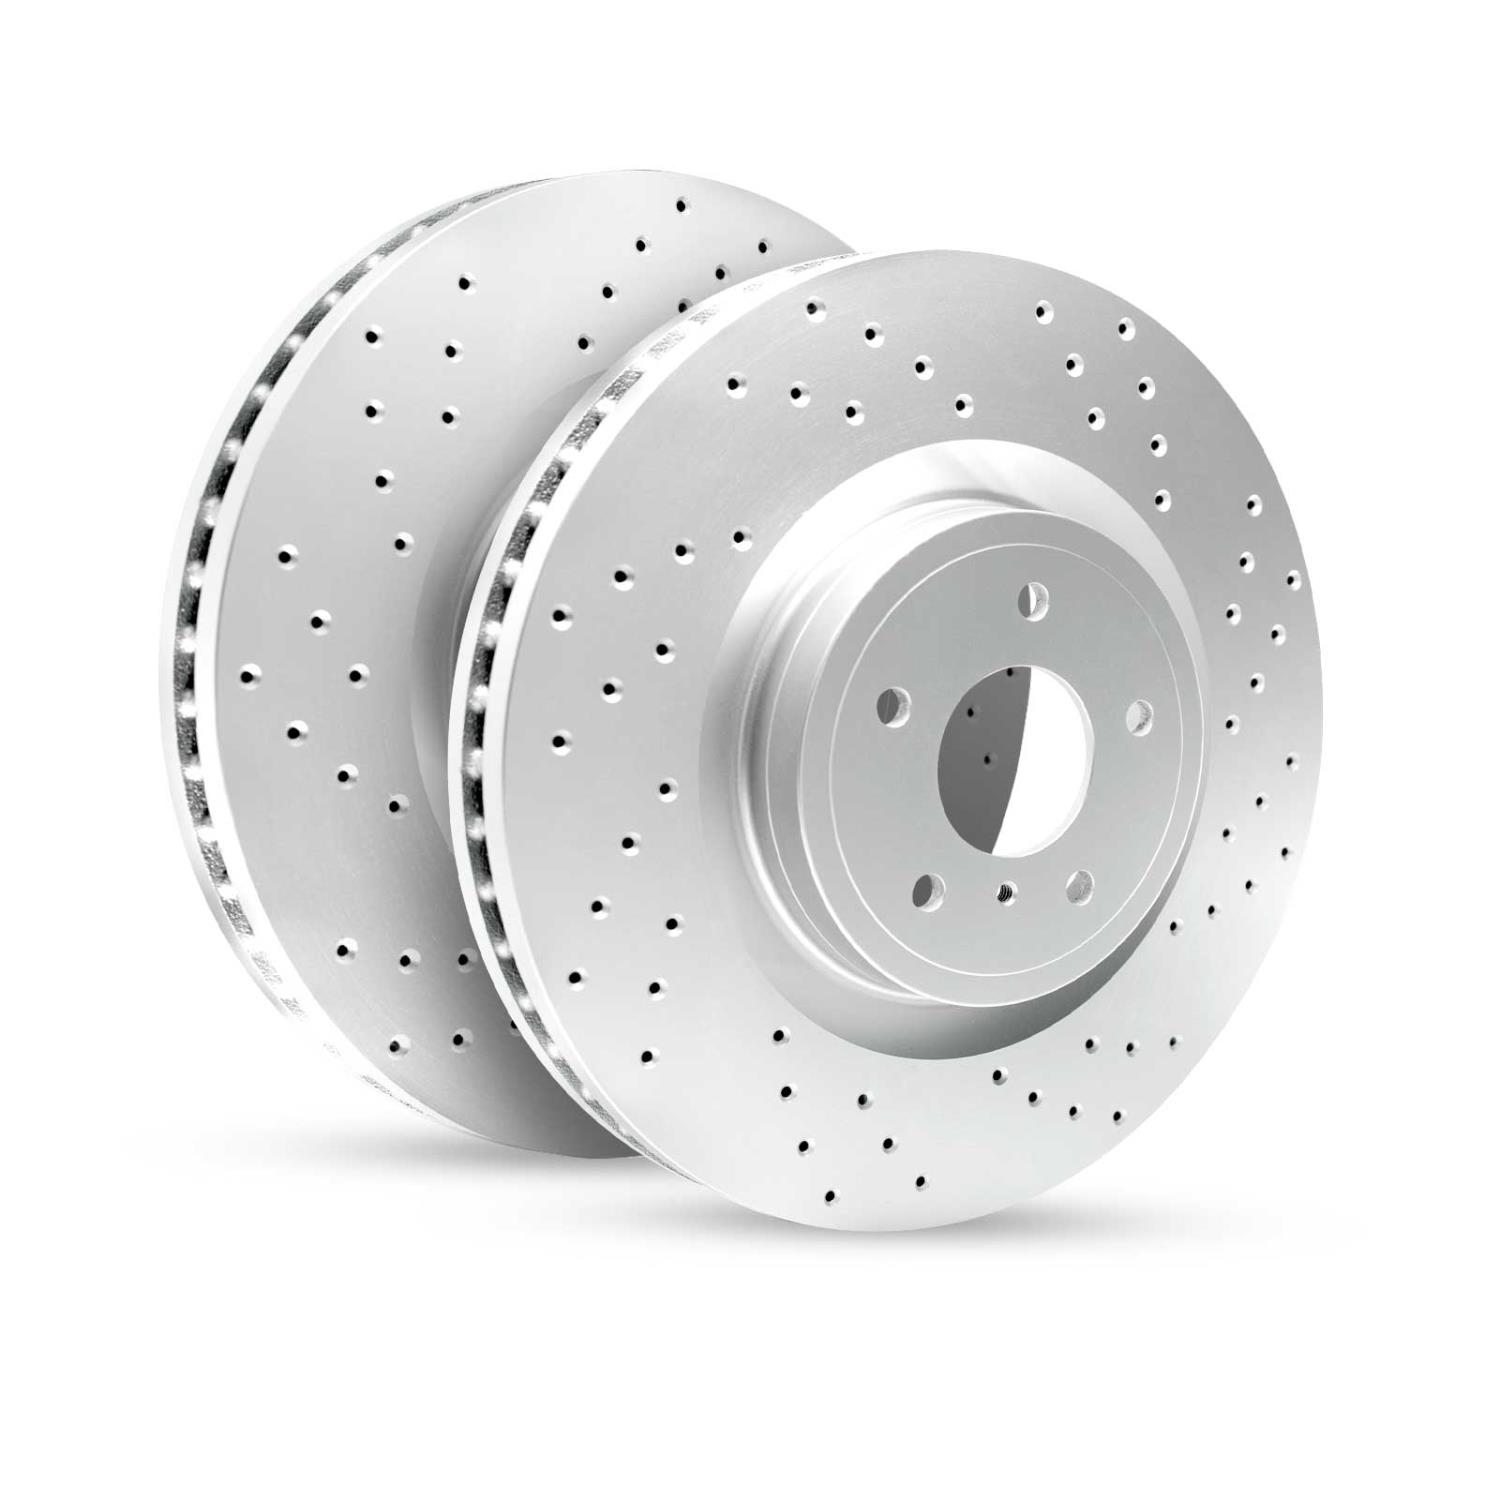 GEO-Carbon Drilled/Slotted Rotors, 2014-2020 Acura/Honda,